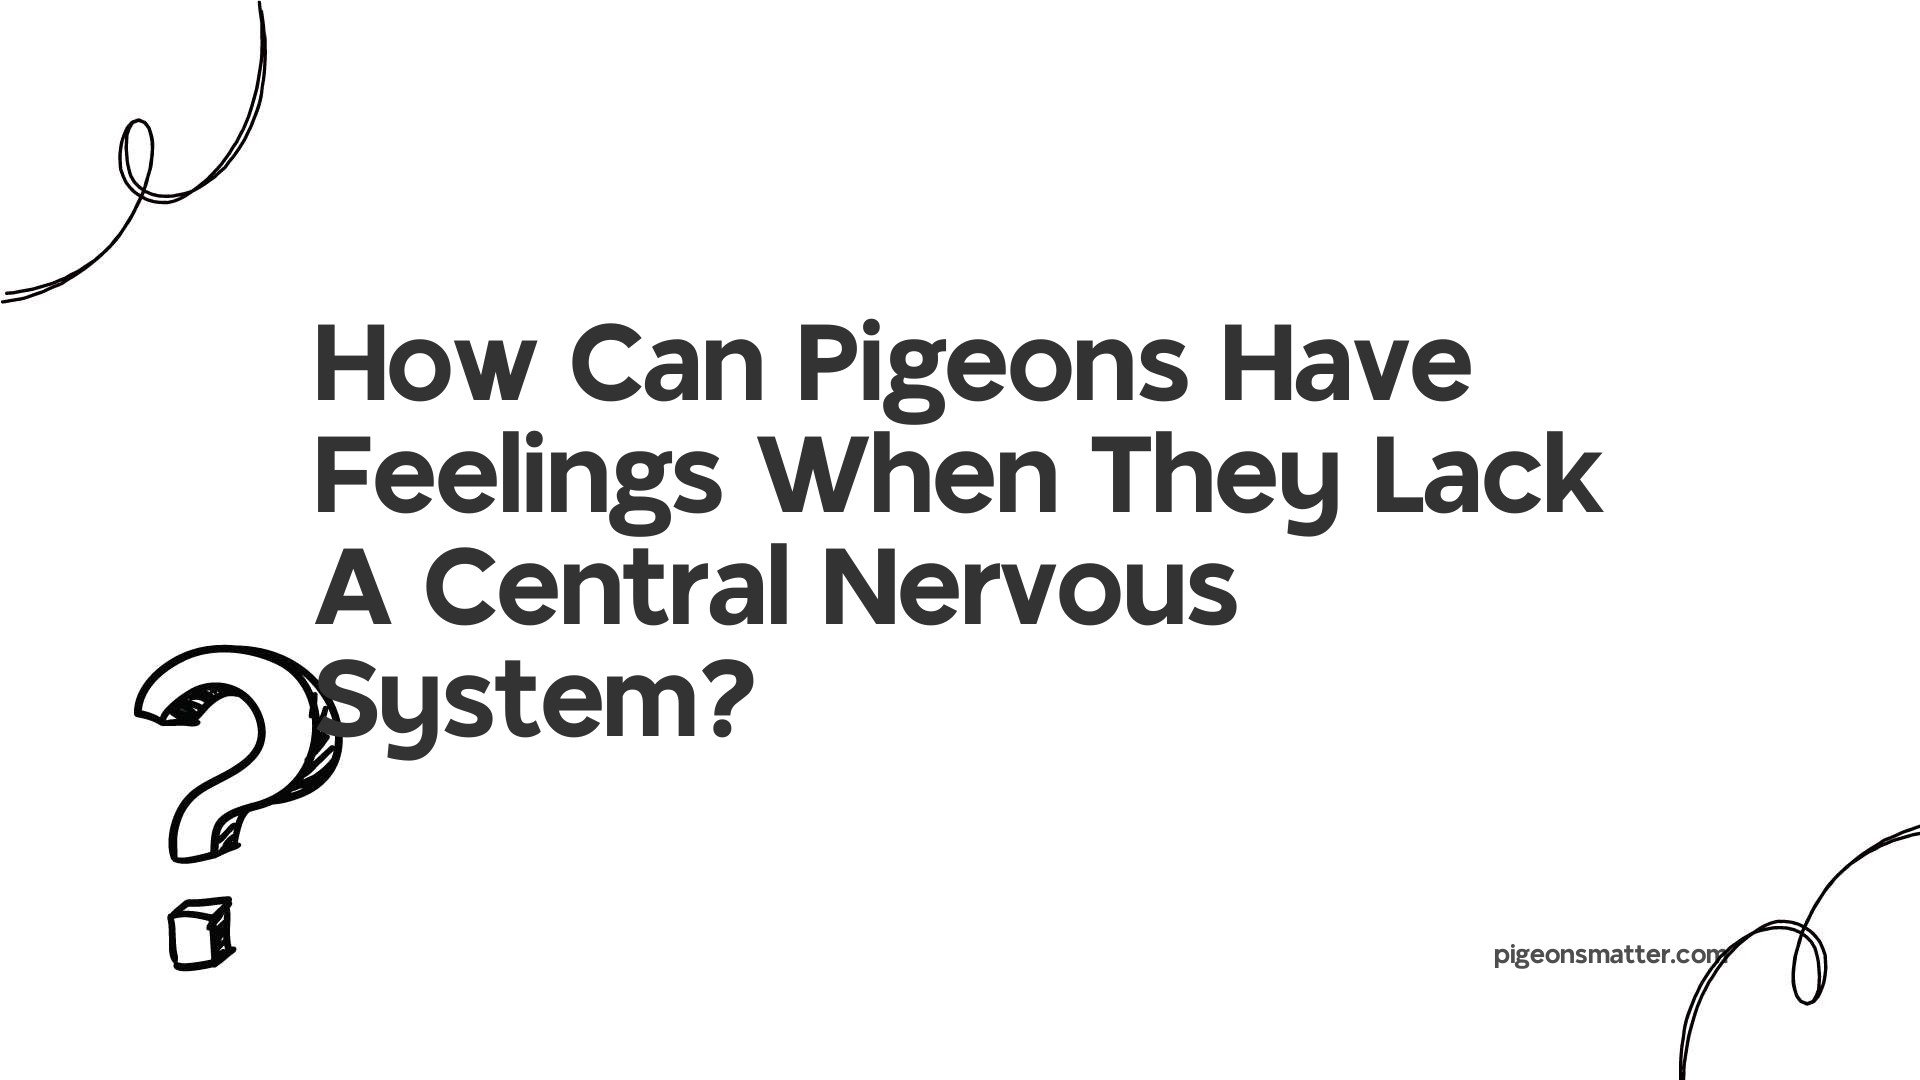 How Can Pigeons Have Feelings When They Lack A Central Nervous System?